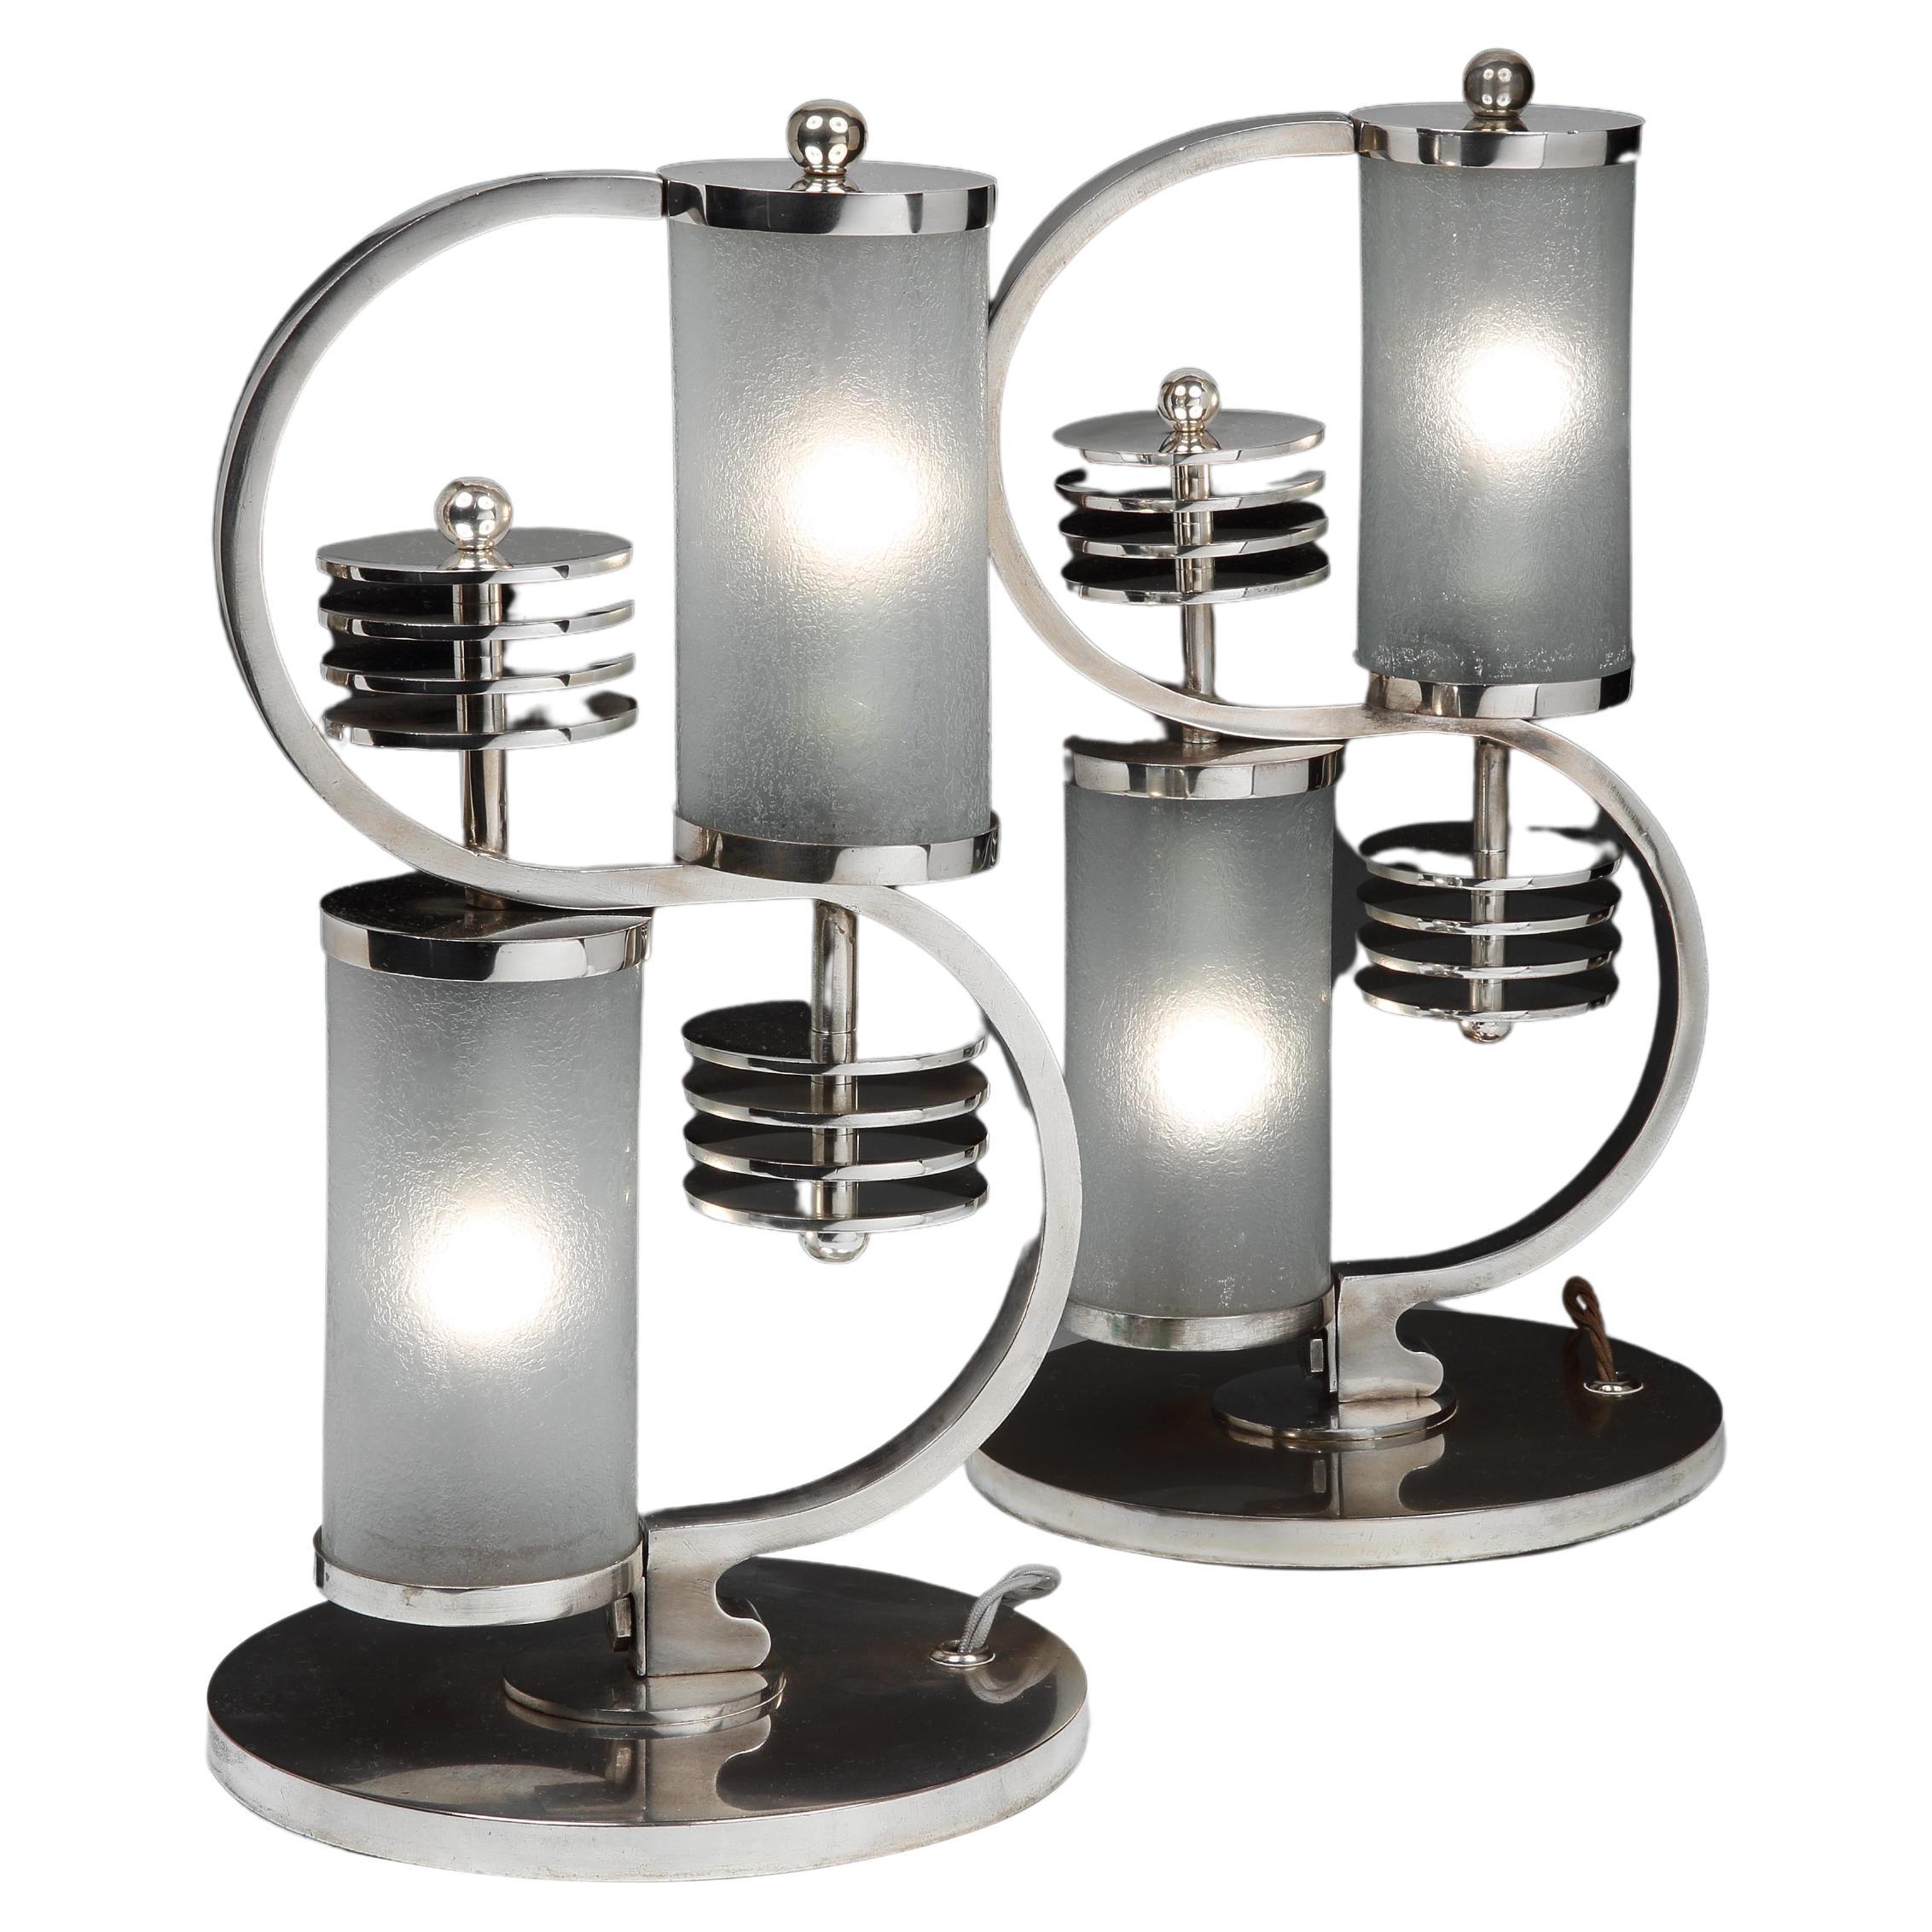 Pair of Modernist Table Lamps with Glass Shades, by Edgar Brandt